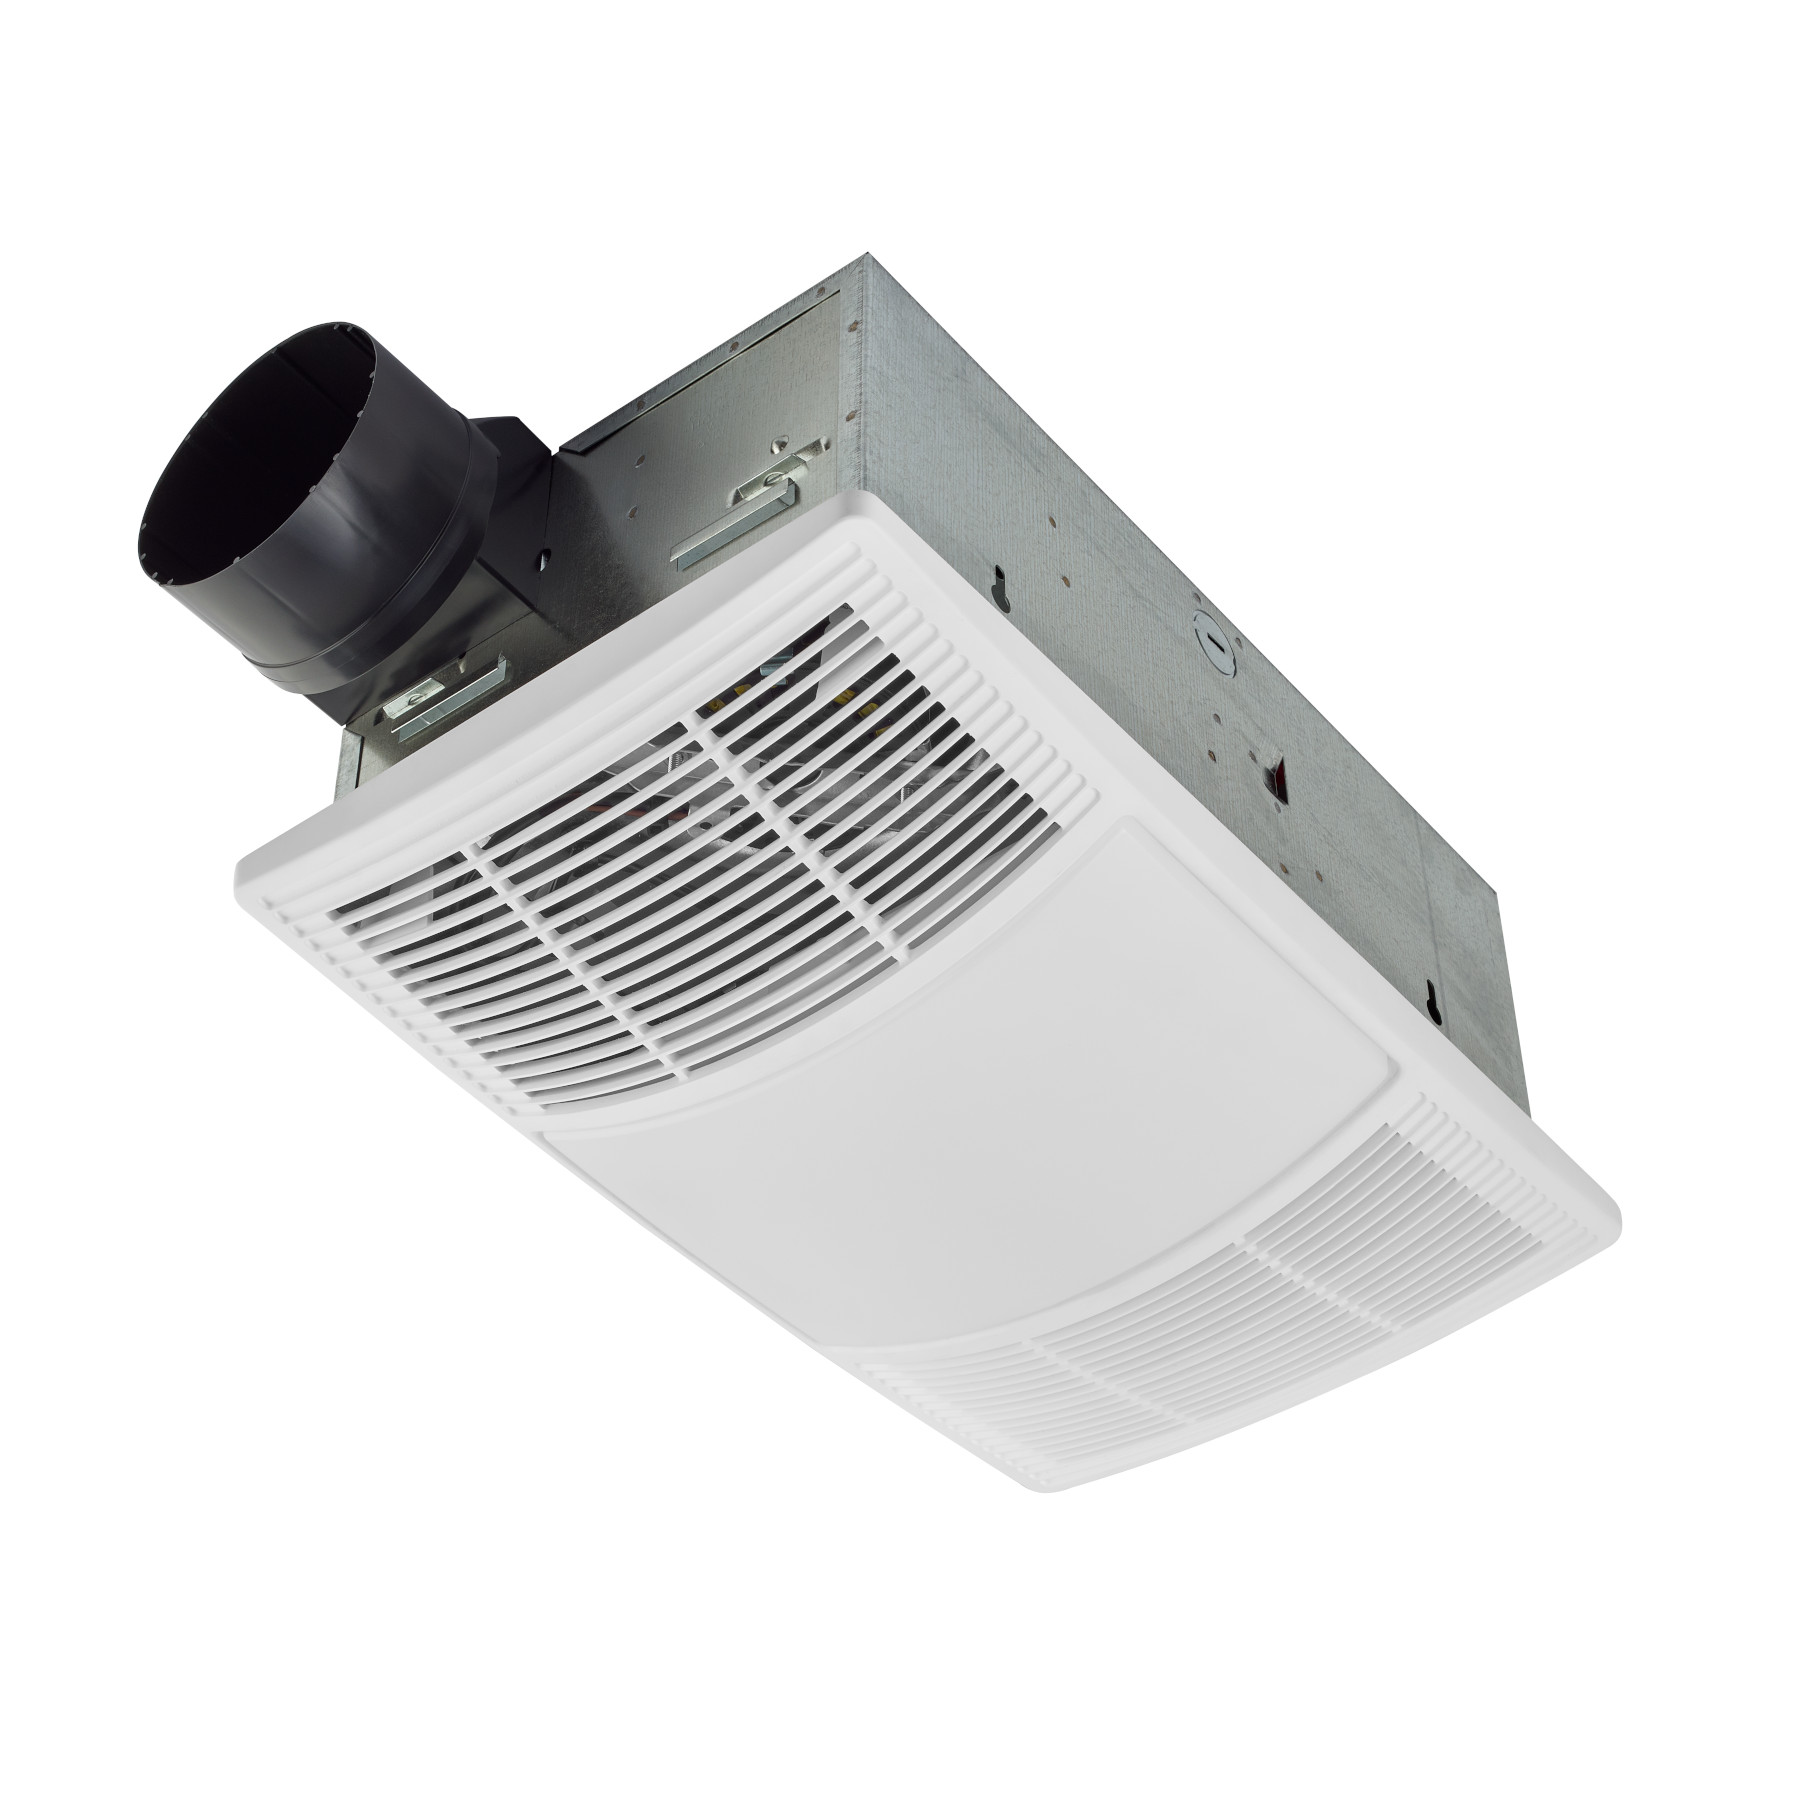 Bath And Exhaust Ventilation Fans With, 100 Cfm Ceiling Bathroom Exhaust Fan With Light And Heater